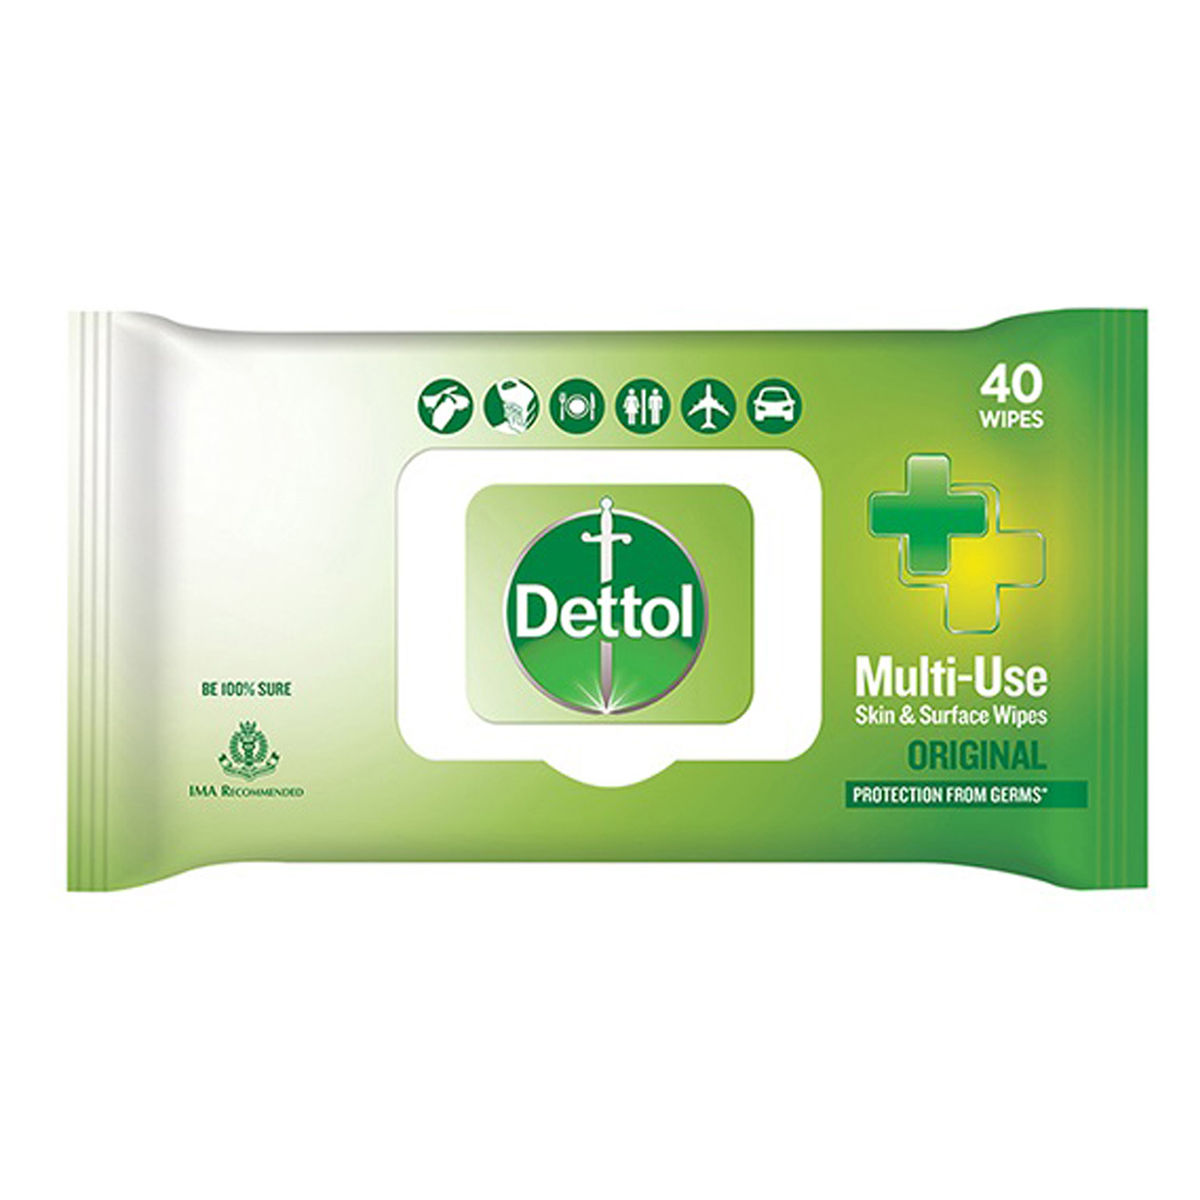 Buy Dettol Original Multi-Use Skin & Surface Wipes, 40 Count Online